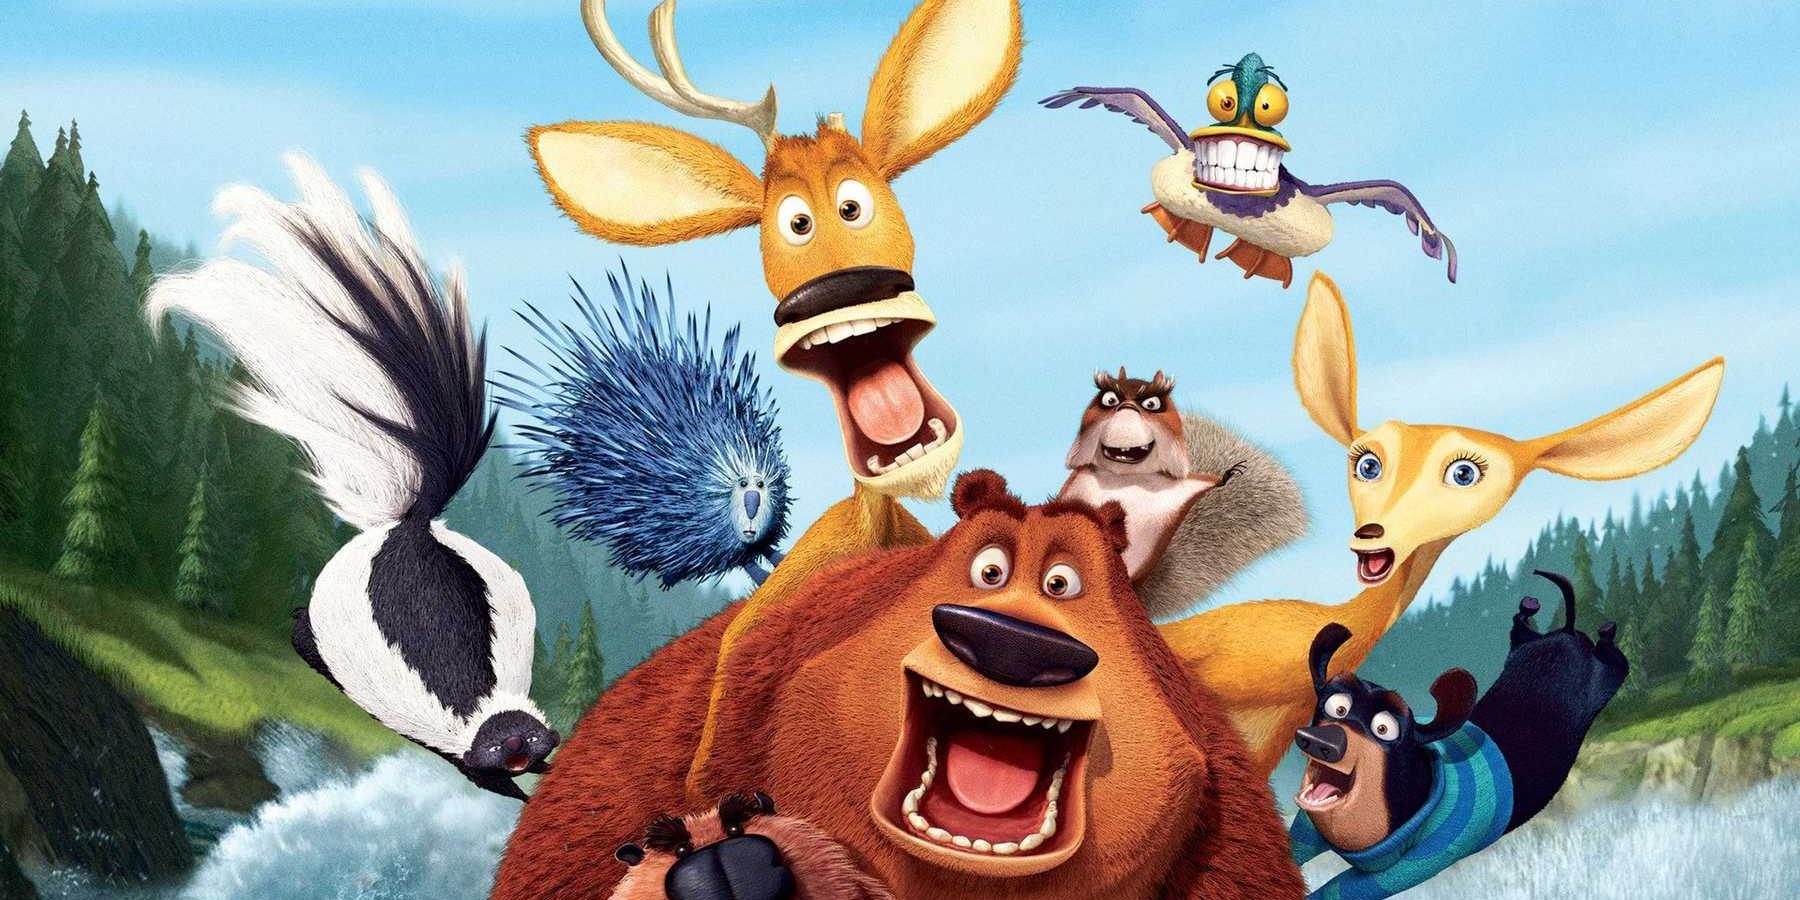 Warner Bros.: The 10 Best Animated Films Of All Time (According To